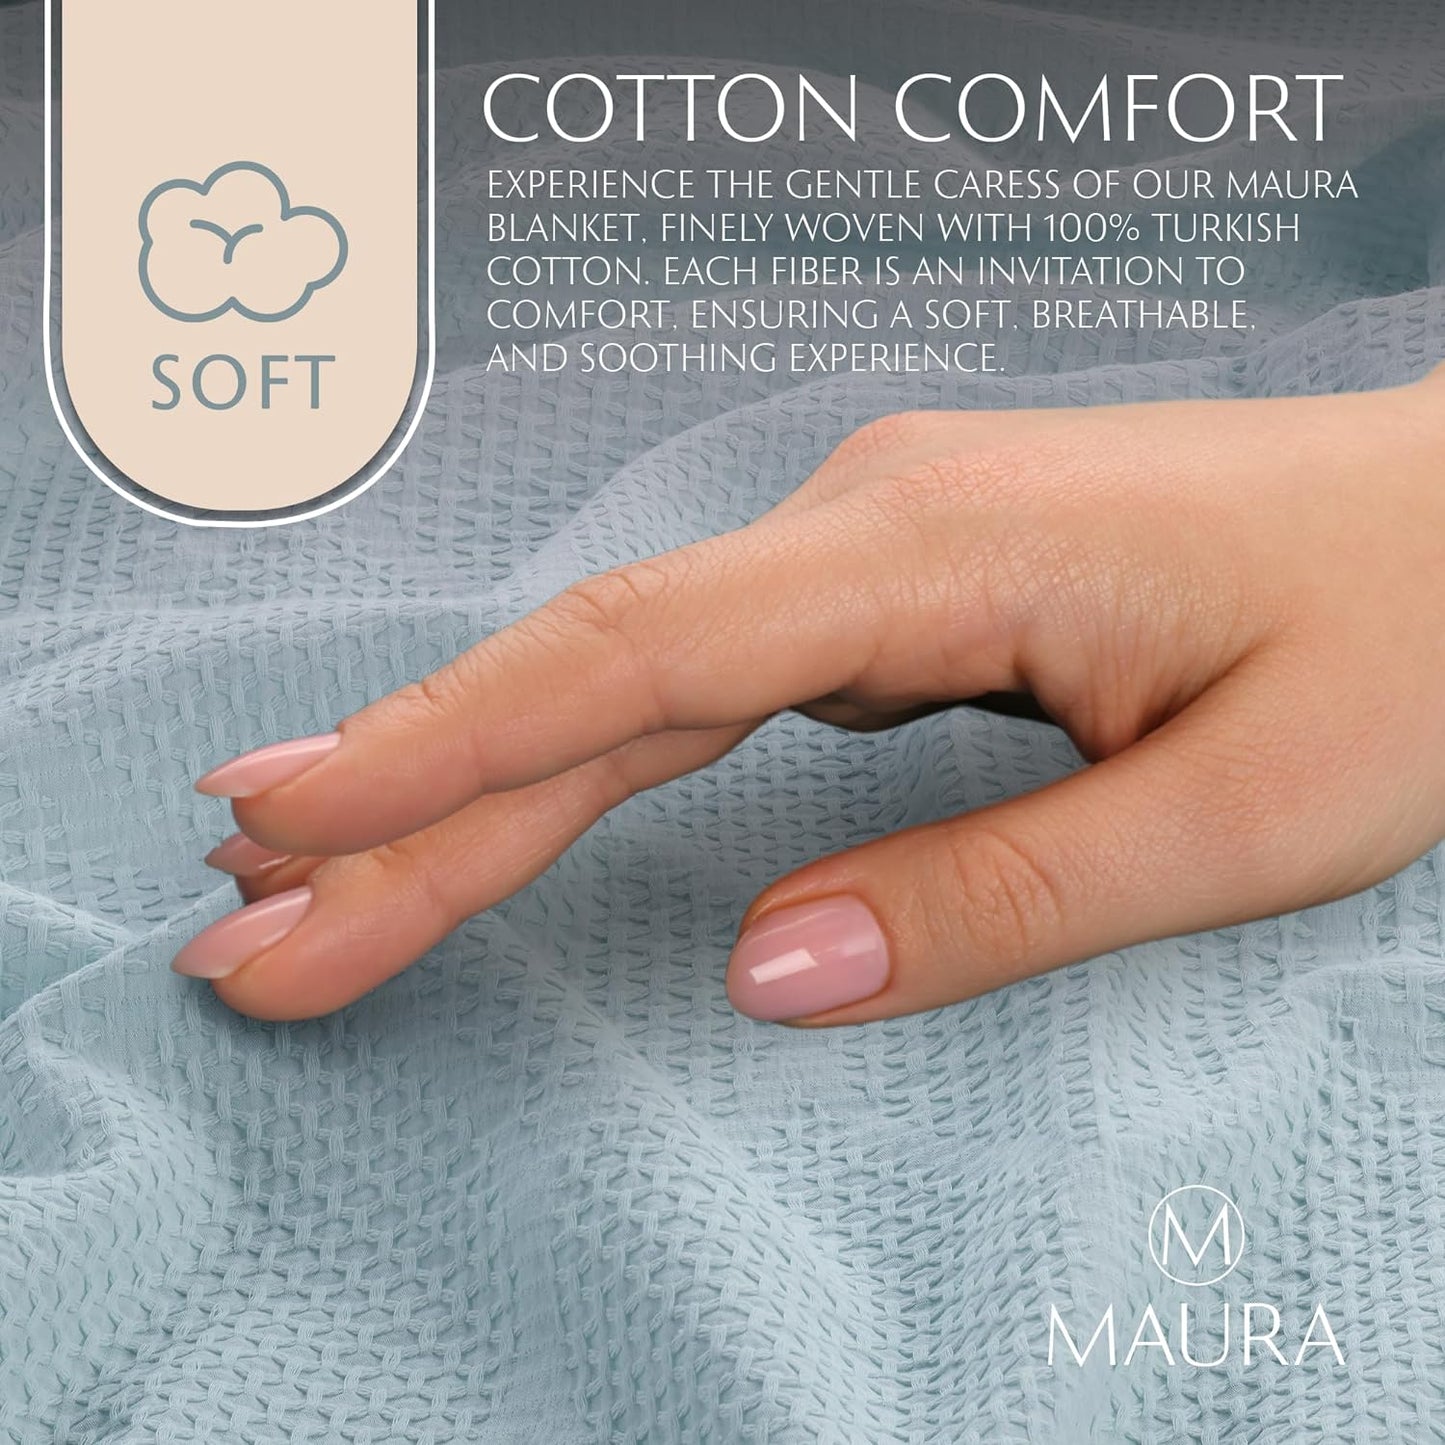 Thin Lightweight Cotton Blankets Skin-Friendly, Breathable, and Fade-Resistant -Modern Bedding Essentials for Year-Round Comfort, Style, and Quality Sleep Experience. Full/Queen 90”X 90” Seafoam